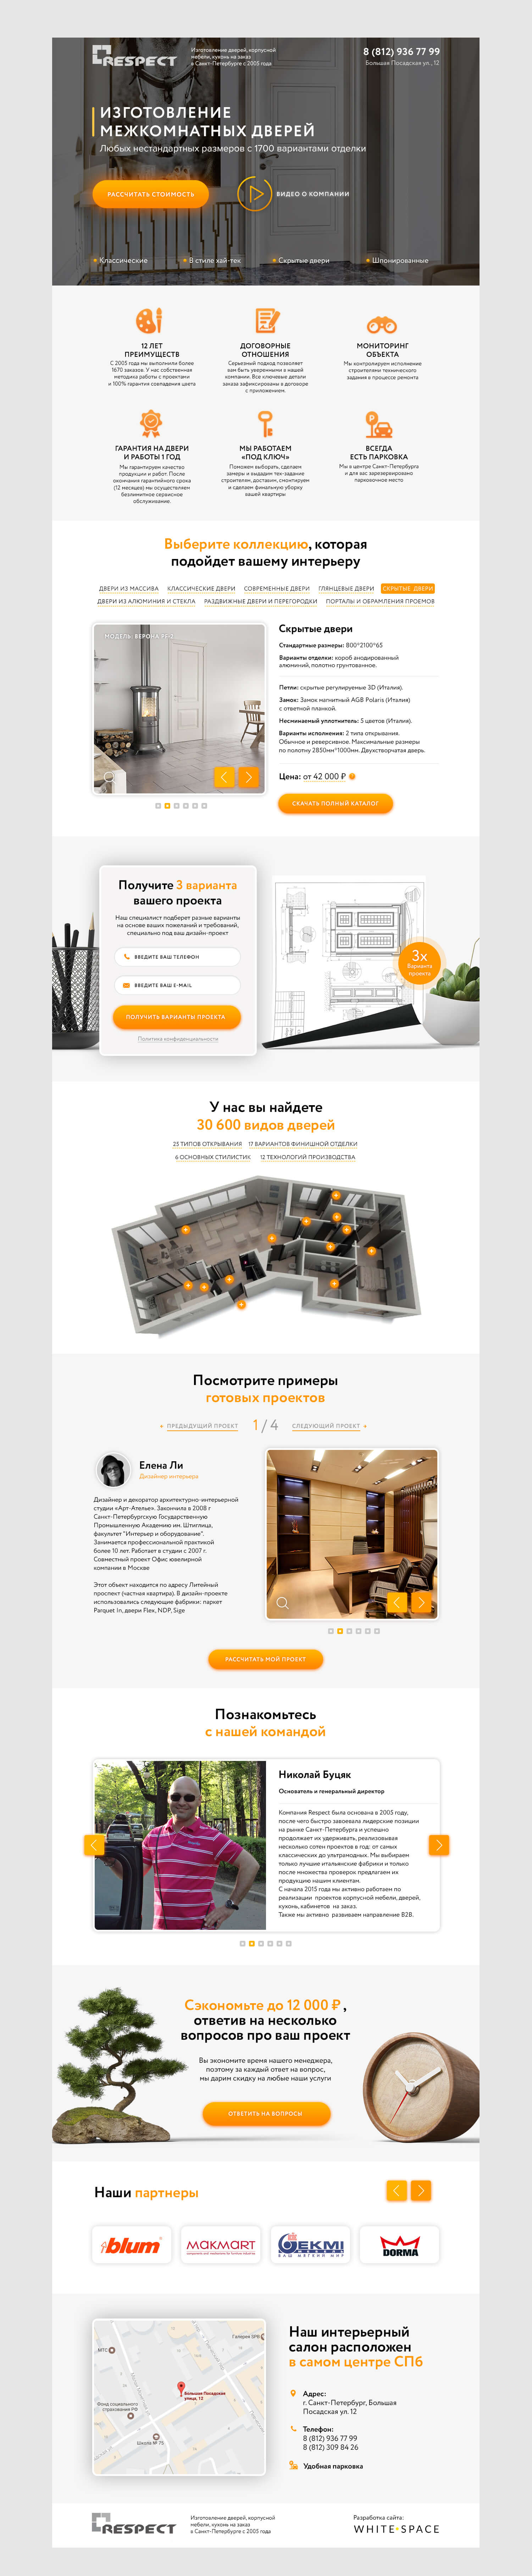 https://white-space.ru/wp-content/themes/white_space_theme/img